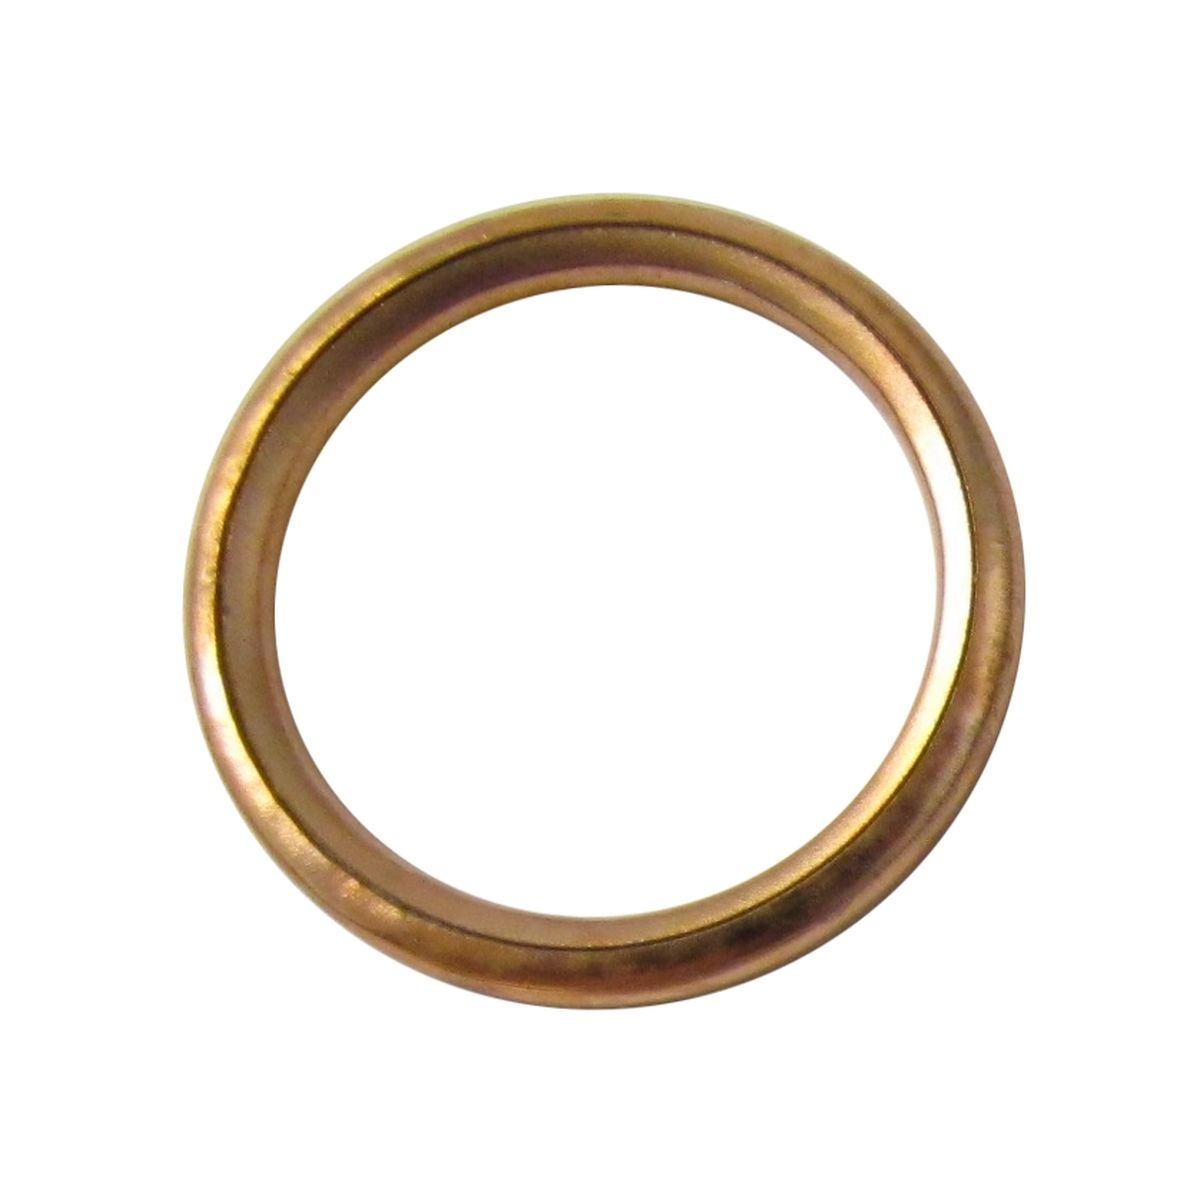 Exhaust Sale Gasket Copper 1 for 2008 Keeway Outlook 125 Opening large release sale